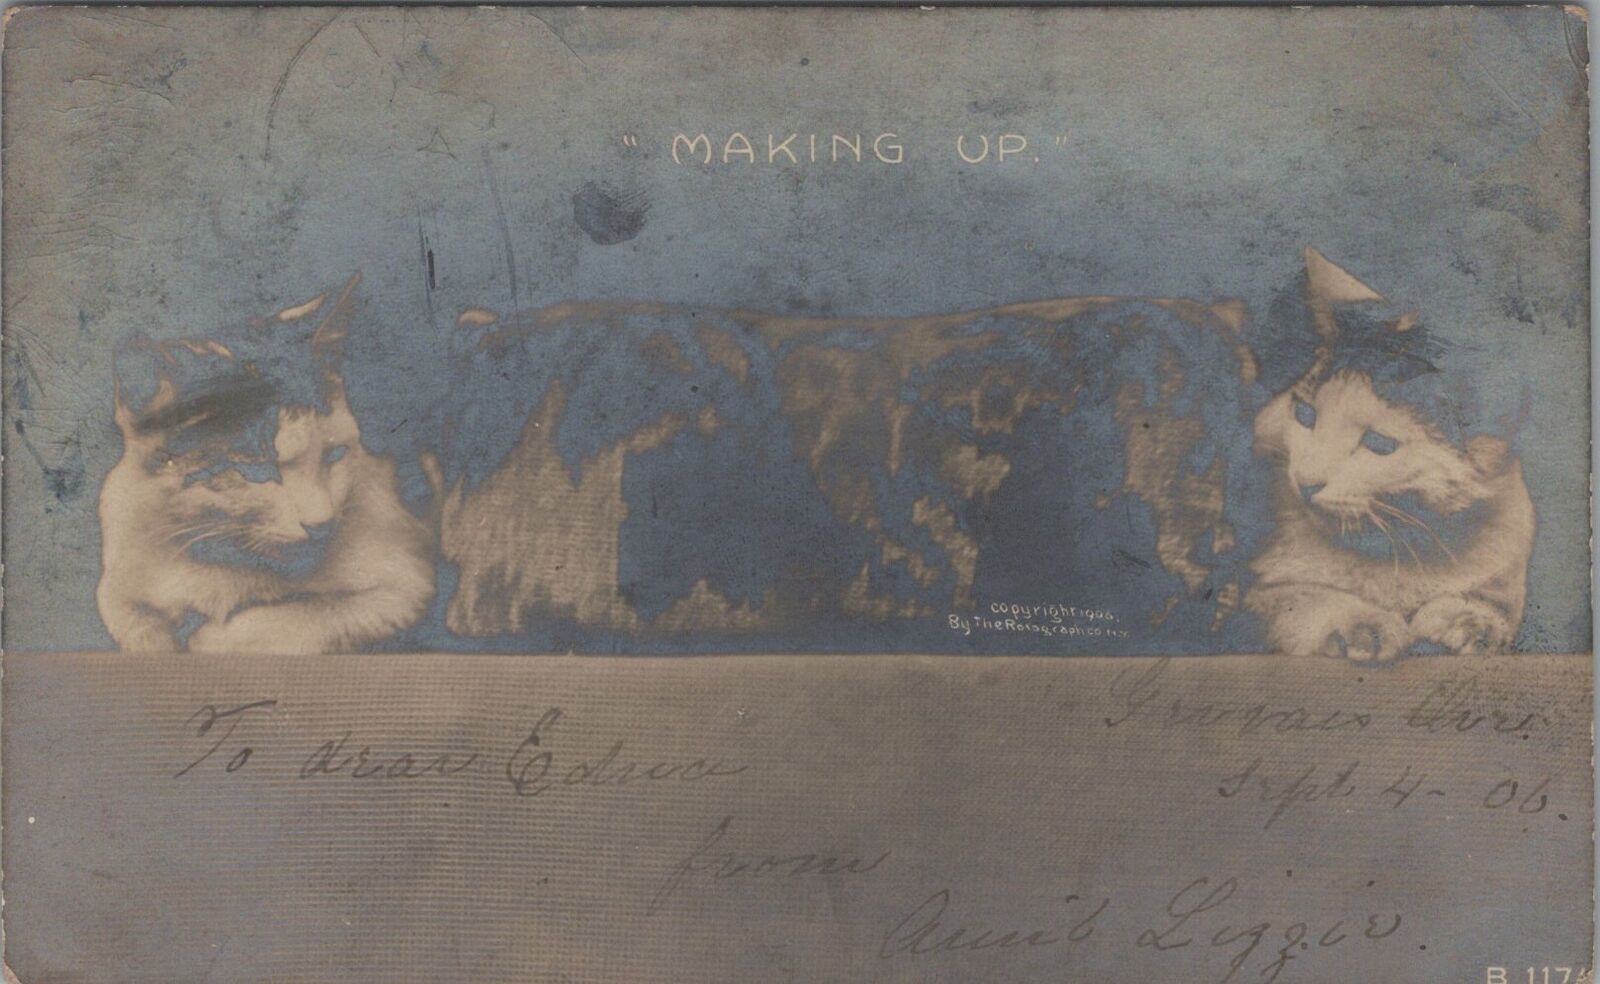 RPPC Postcard Cats in Sock Making Up 1906